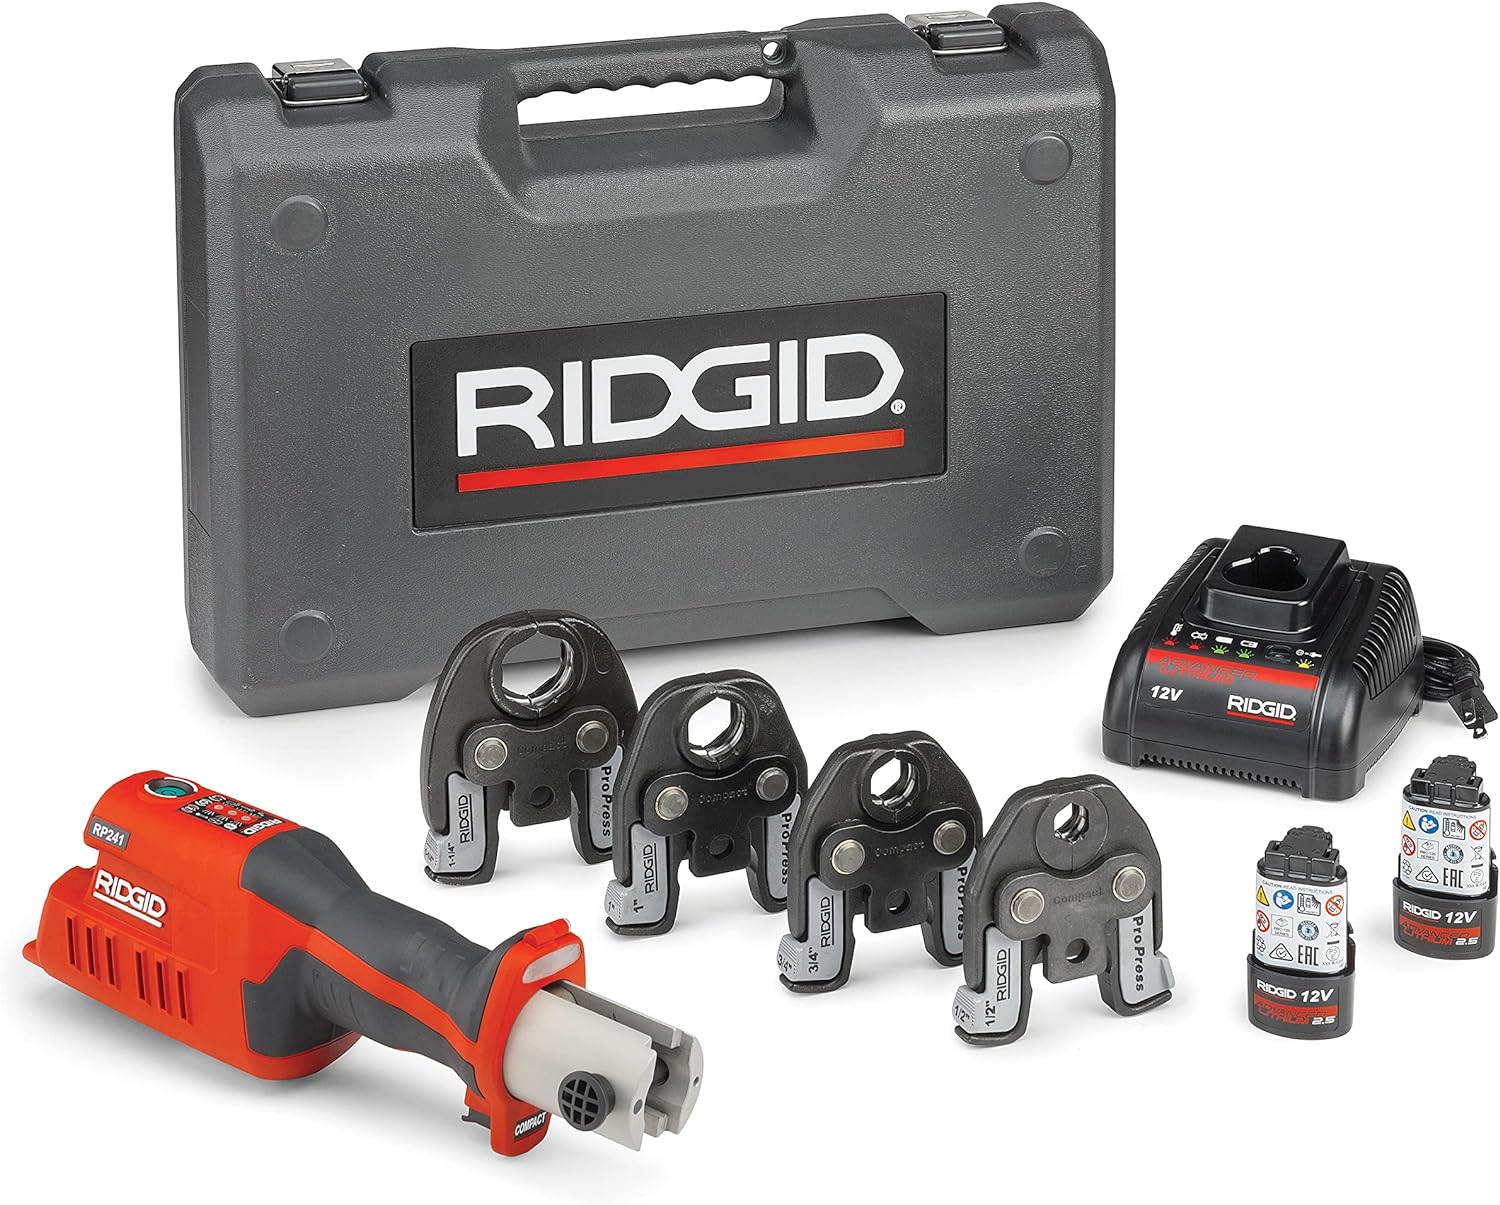 RIDGID 57363 Model RP 241 Compact Press Tool Kit with 1/2-1-1/4 Pro Press Jaws and Bluetooth